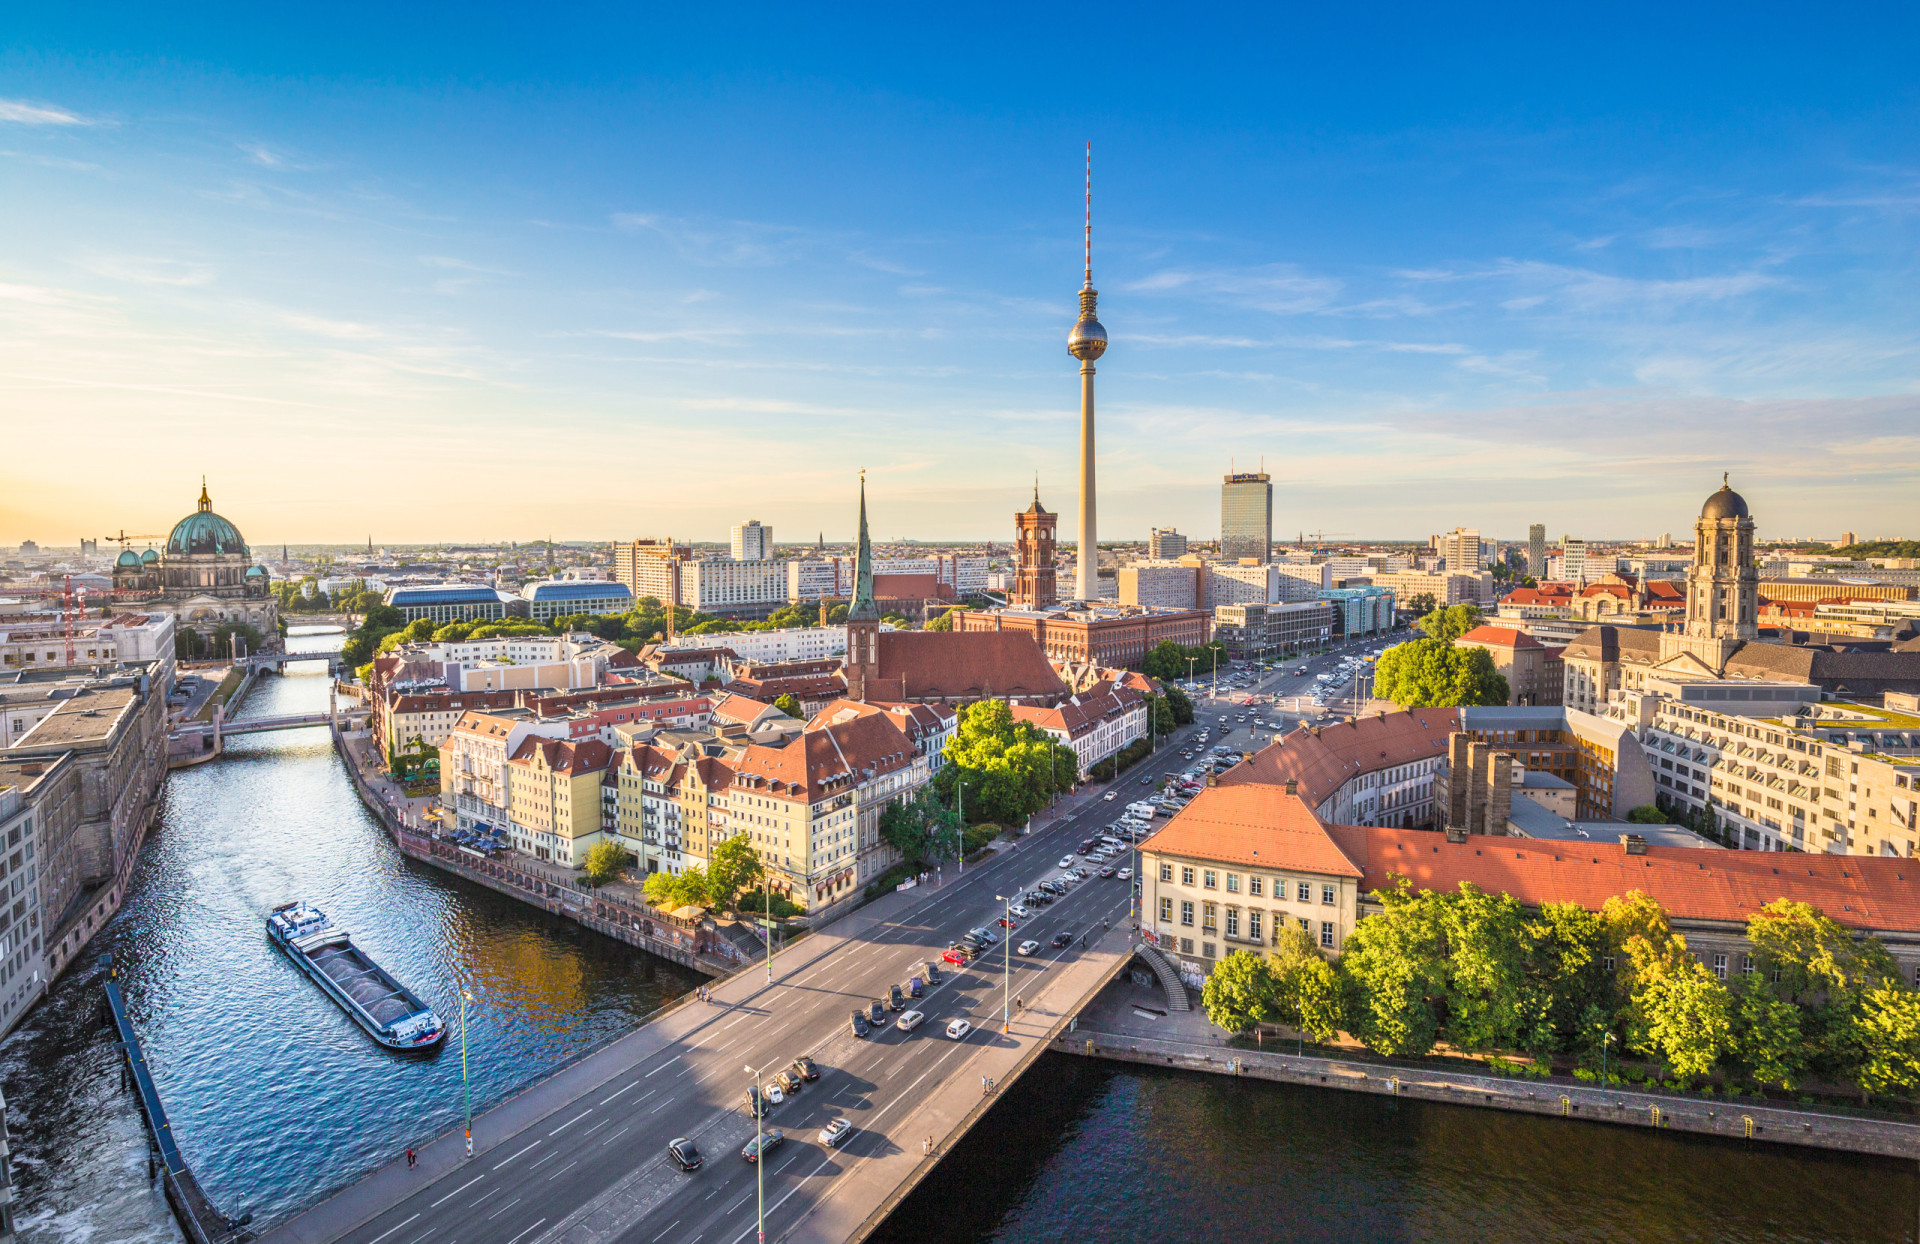 <p>Germany has a "culture tax," called <em>kulturförderabgabe</em>, and a "bed tax," <em>bettensteuer</em>, in cities including Frankfurt, Hamburg, and Berlin. It tends to be around 5% of your hotel bill.</p><p>You may also like:<a href="https://www.starsinsider.com/n/262041?utm_source=msn.com&utm_medium=display&utm_campaign=referral_description&utm_content=683481en-my"> Laugh out loud: The best comedians in history</a></p>